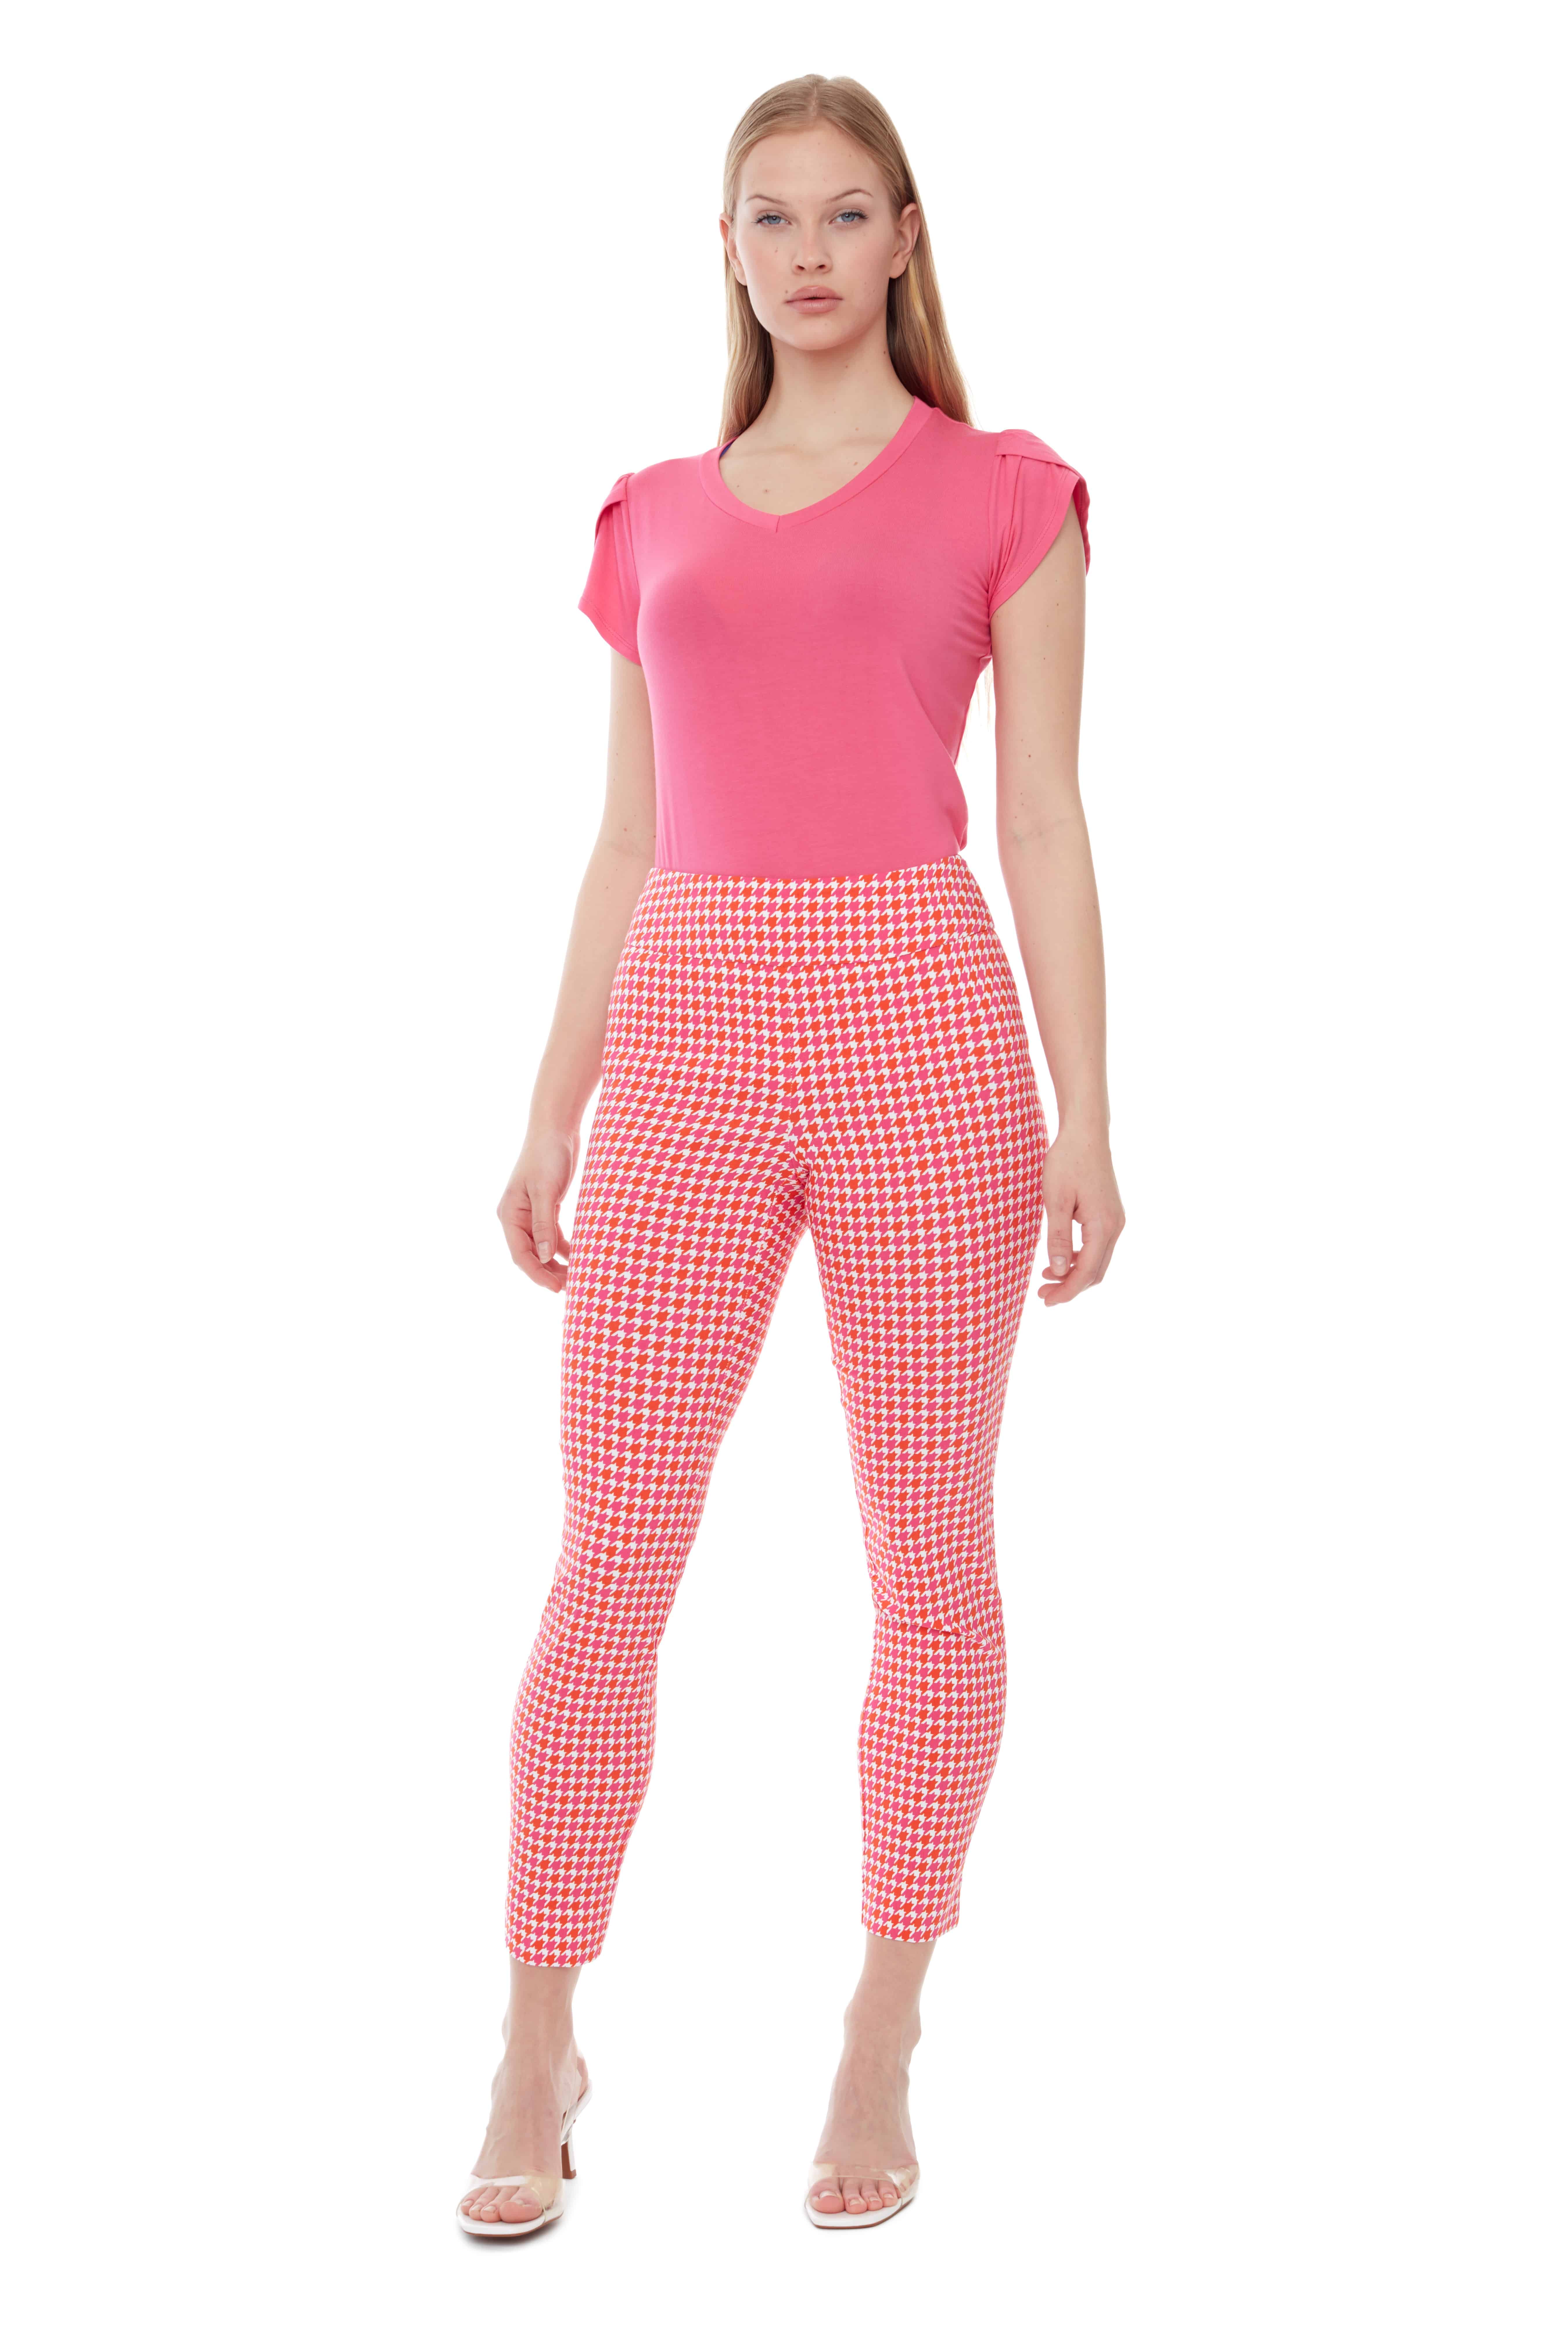 Chic & comfortable pink houndstooth leggings